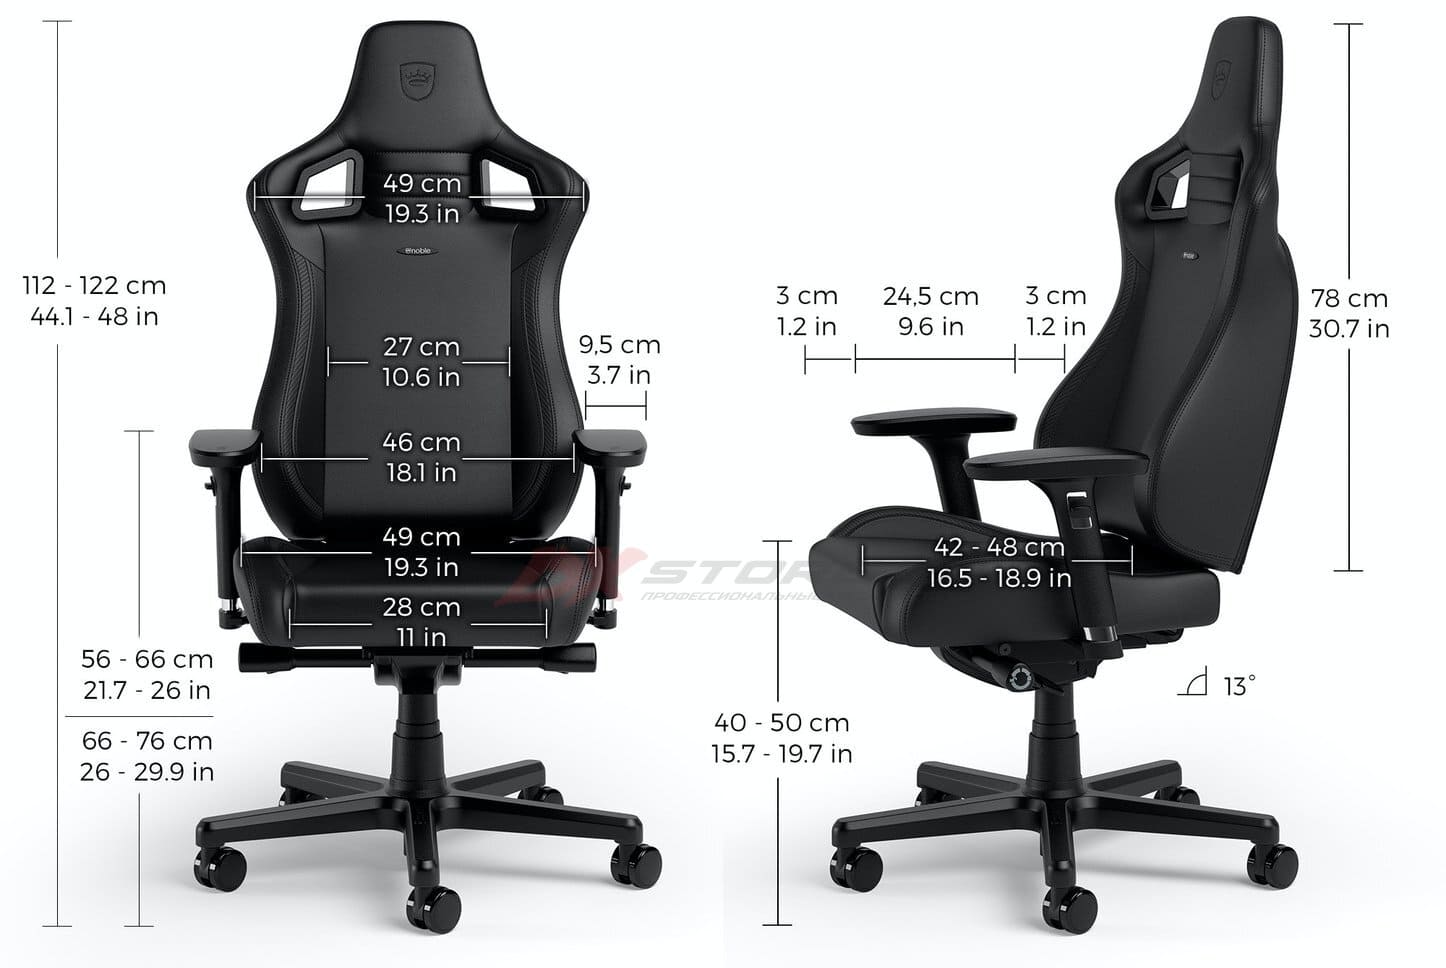 noblechairs EPIC Compact Hybrid Leather Black - Размеры